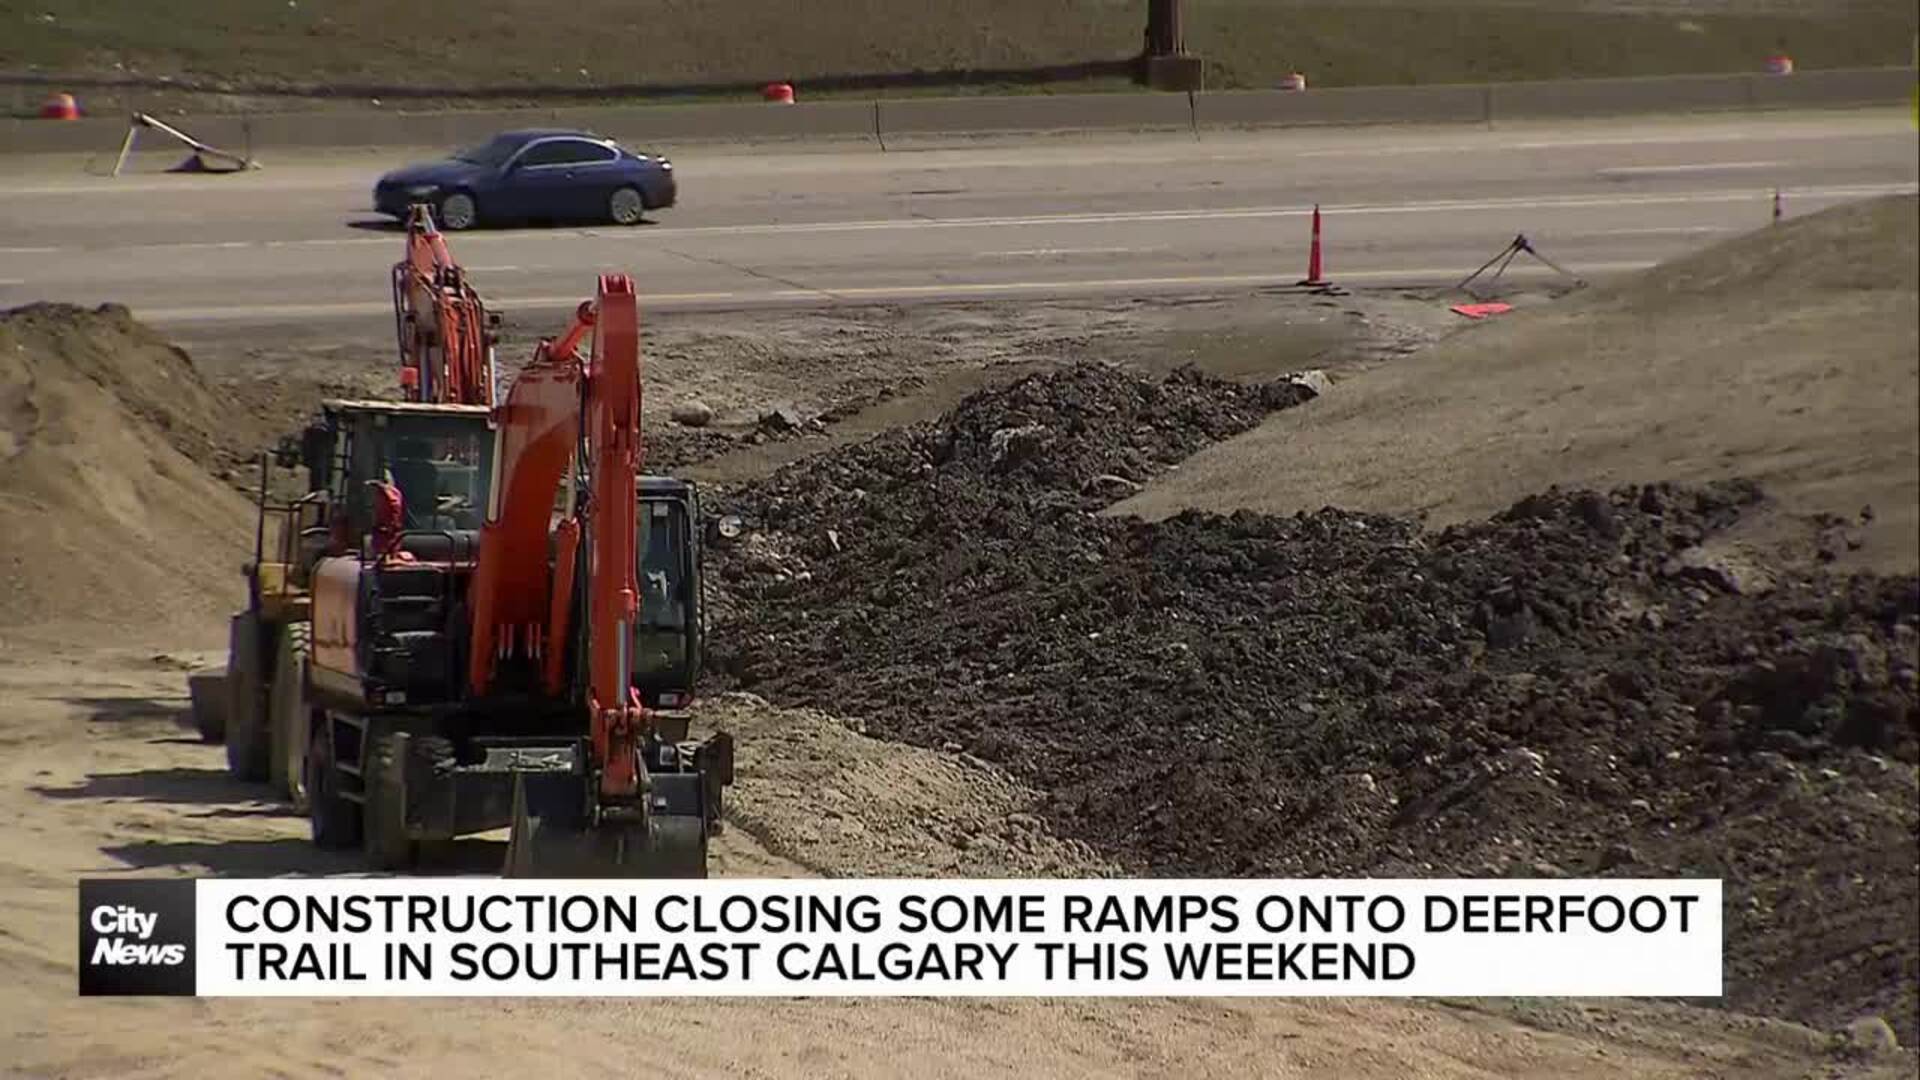 Construction to close some ramps onto Deerfoot Trail